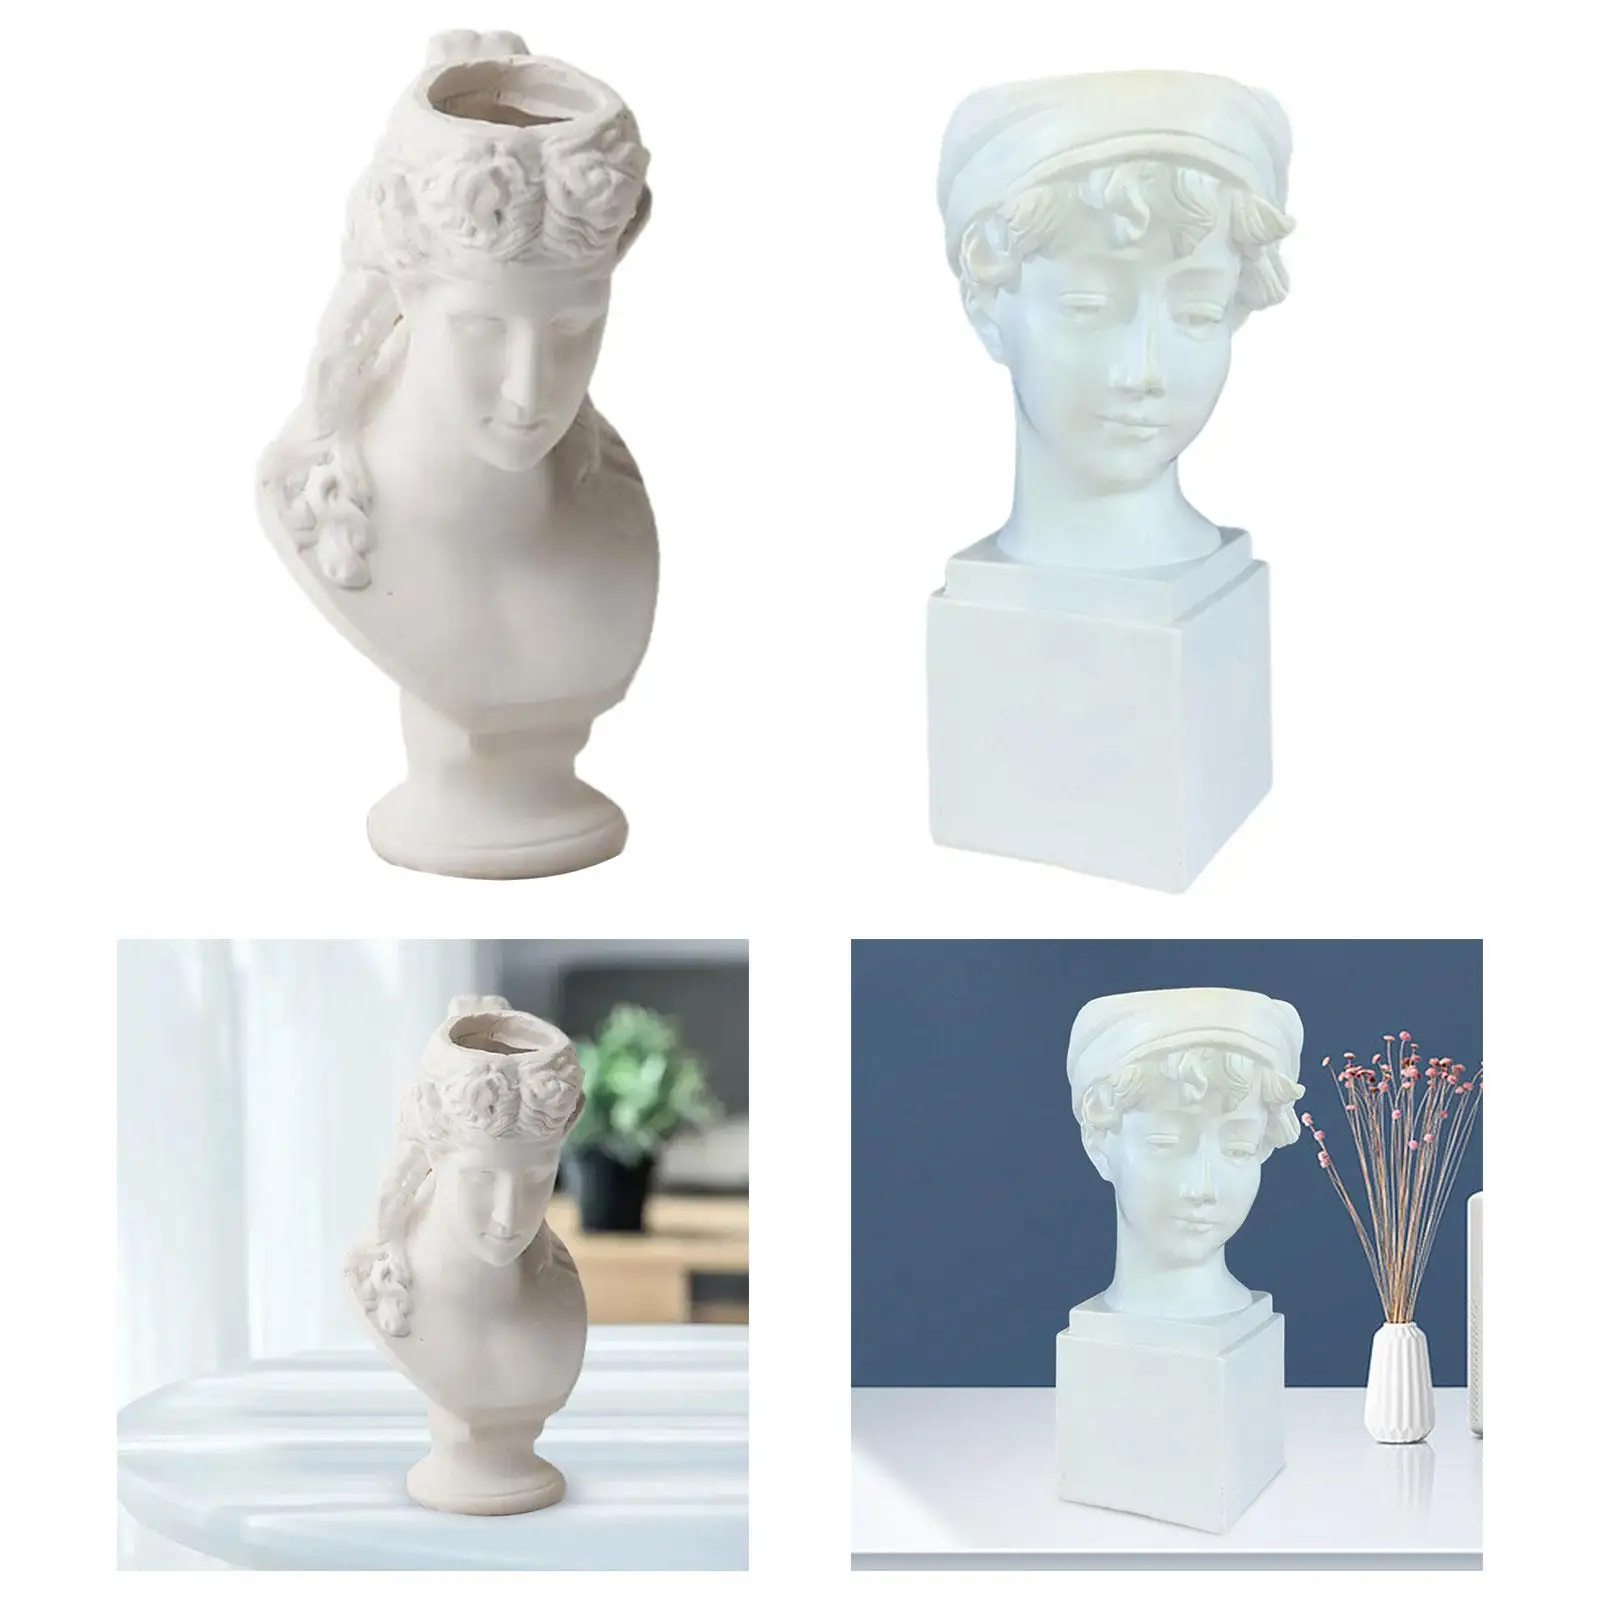 Bust Statue Pen Holder Novelty Resin Figurine Pencil Holder Container Desk Accessories Stationery for Home Office Supplies Gift